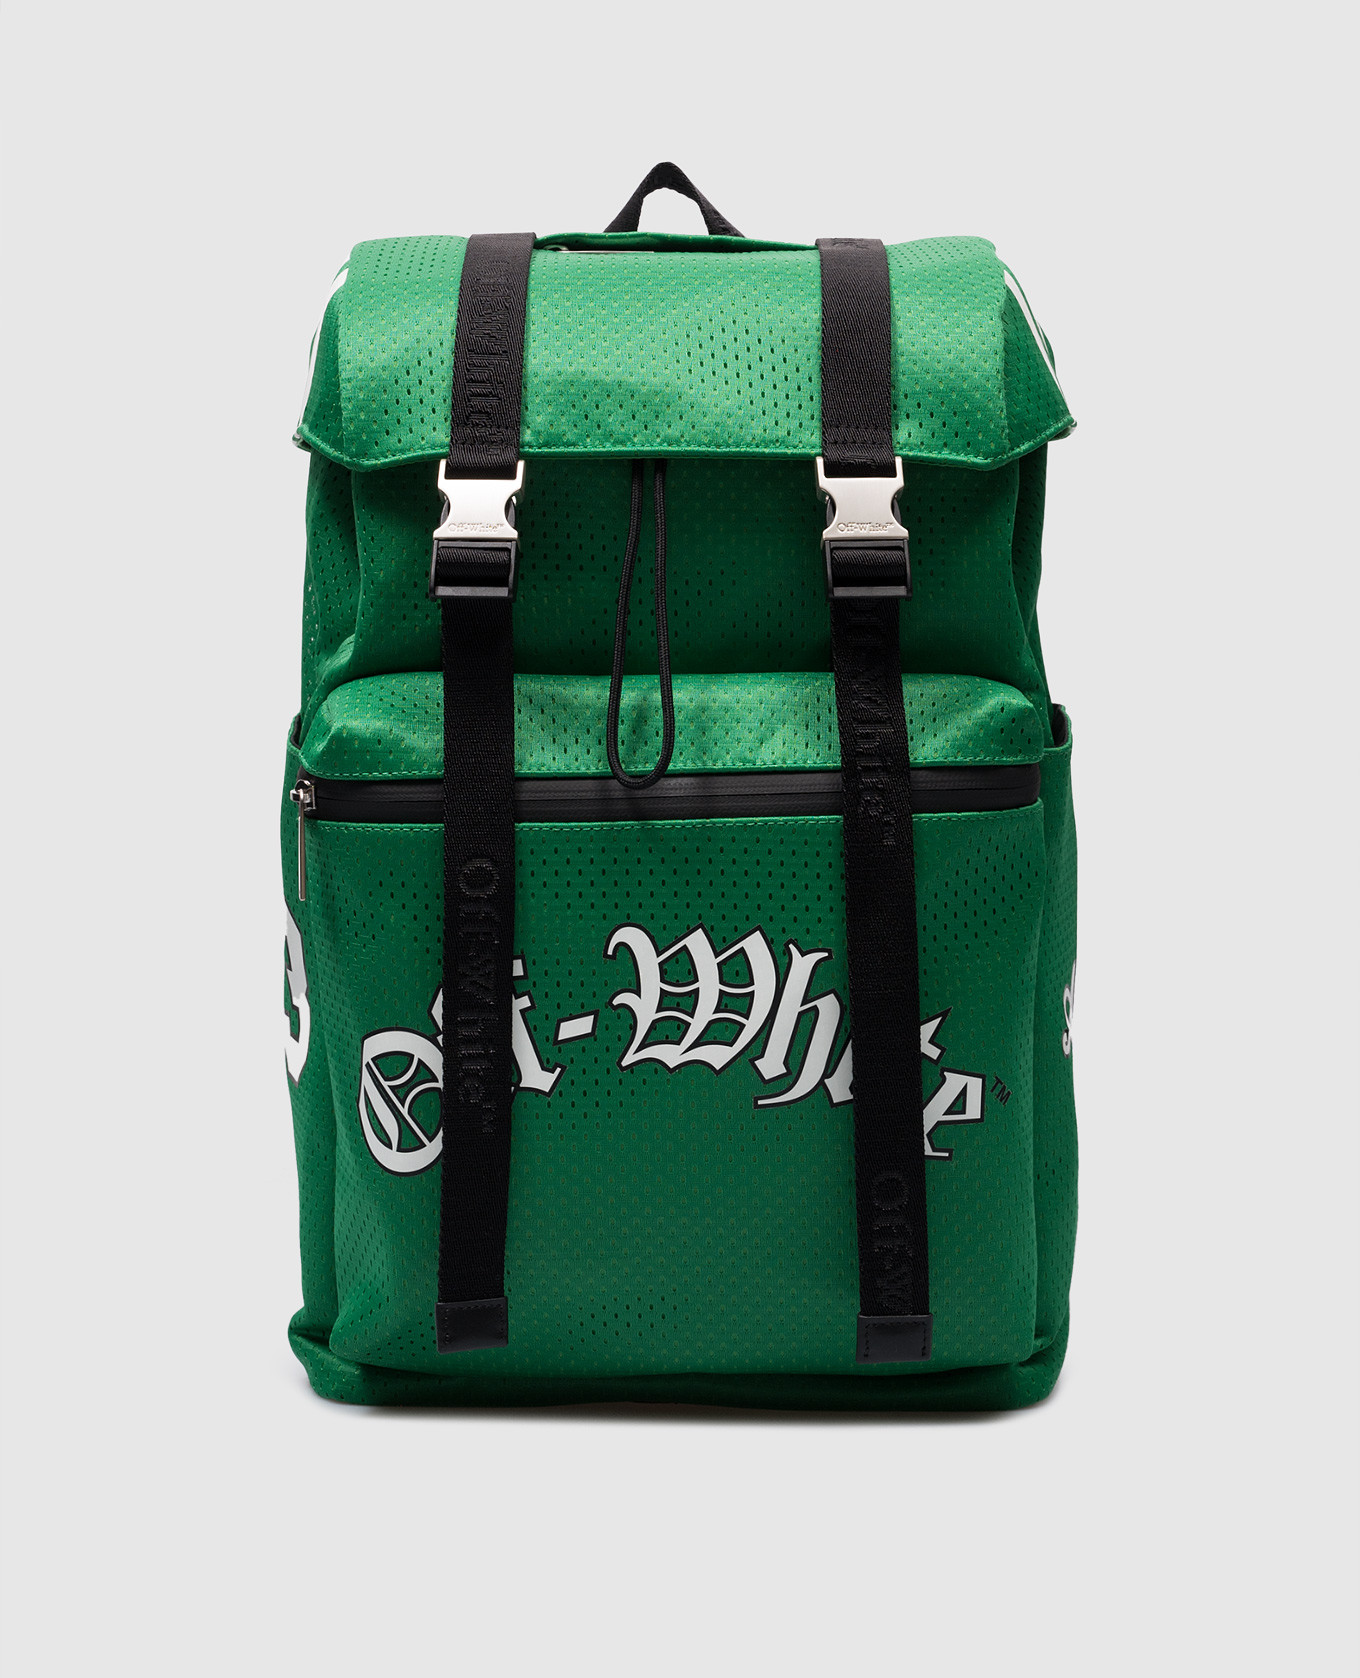 Green backpack with logo print